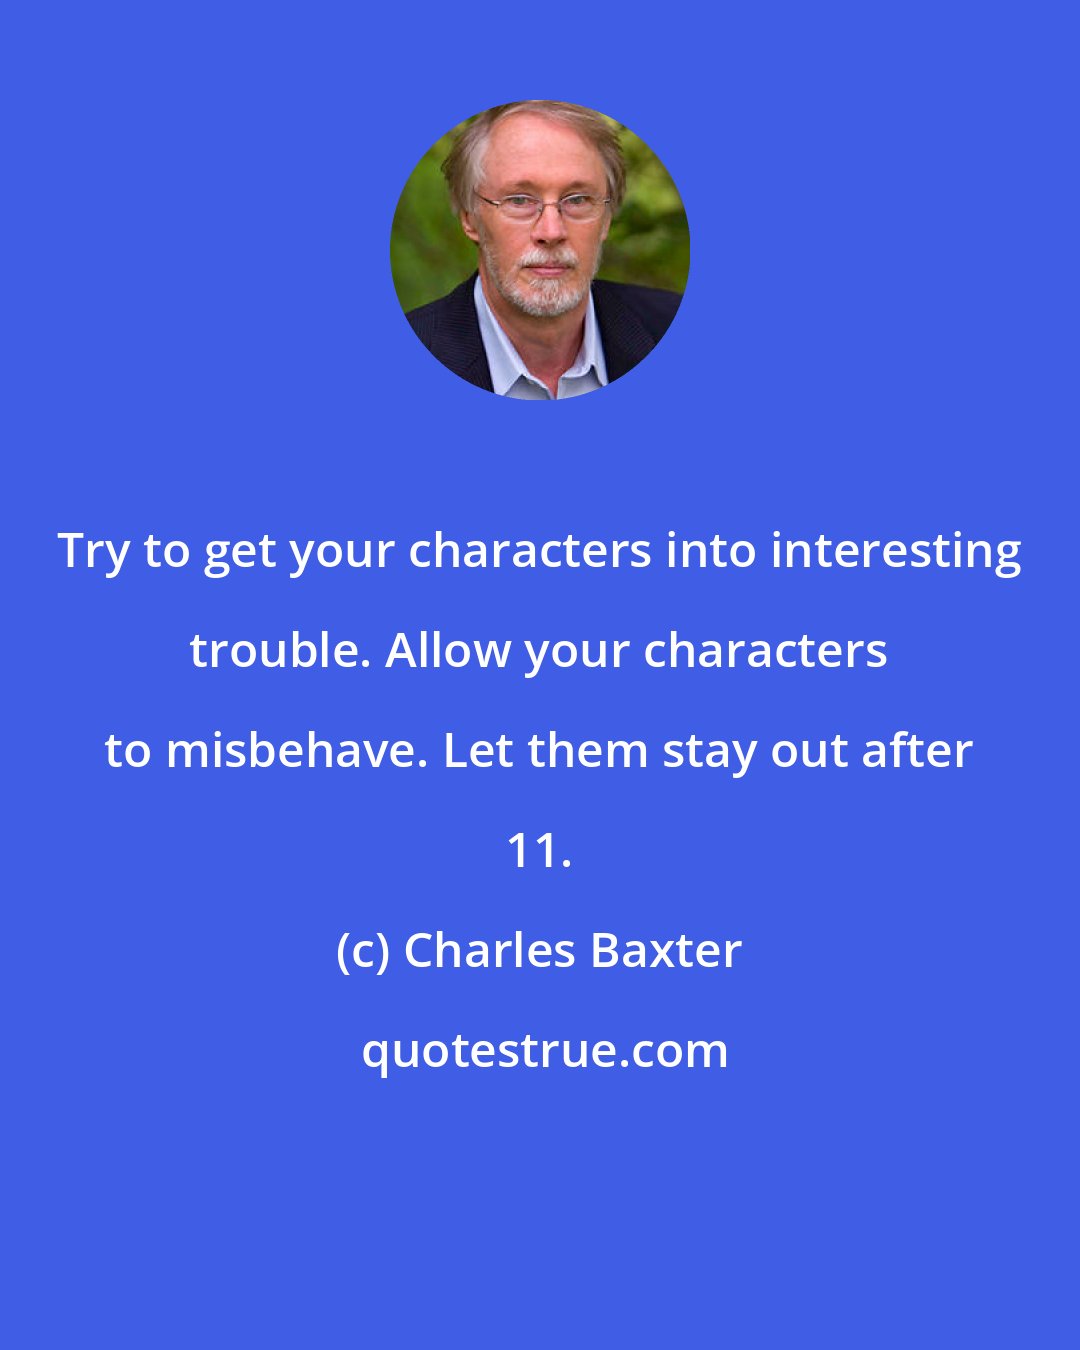 Charles Baxter: Try to get your characters into interesting trouble. Allow your characters to misbehave. Let them stay out after 11.